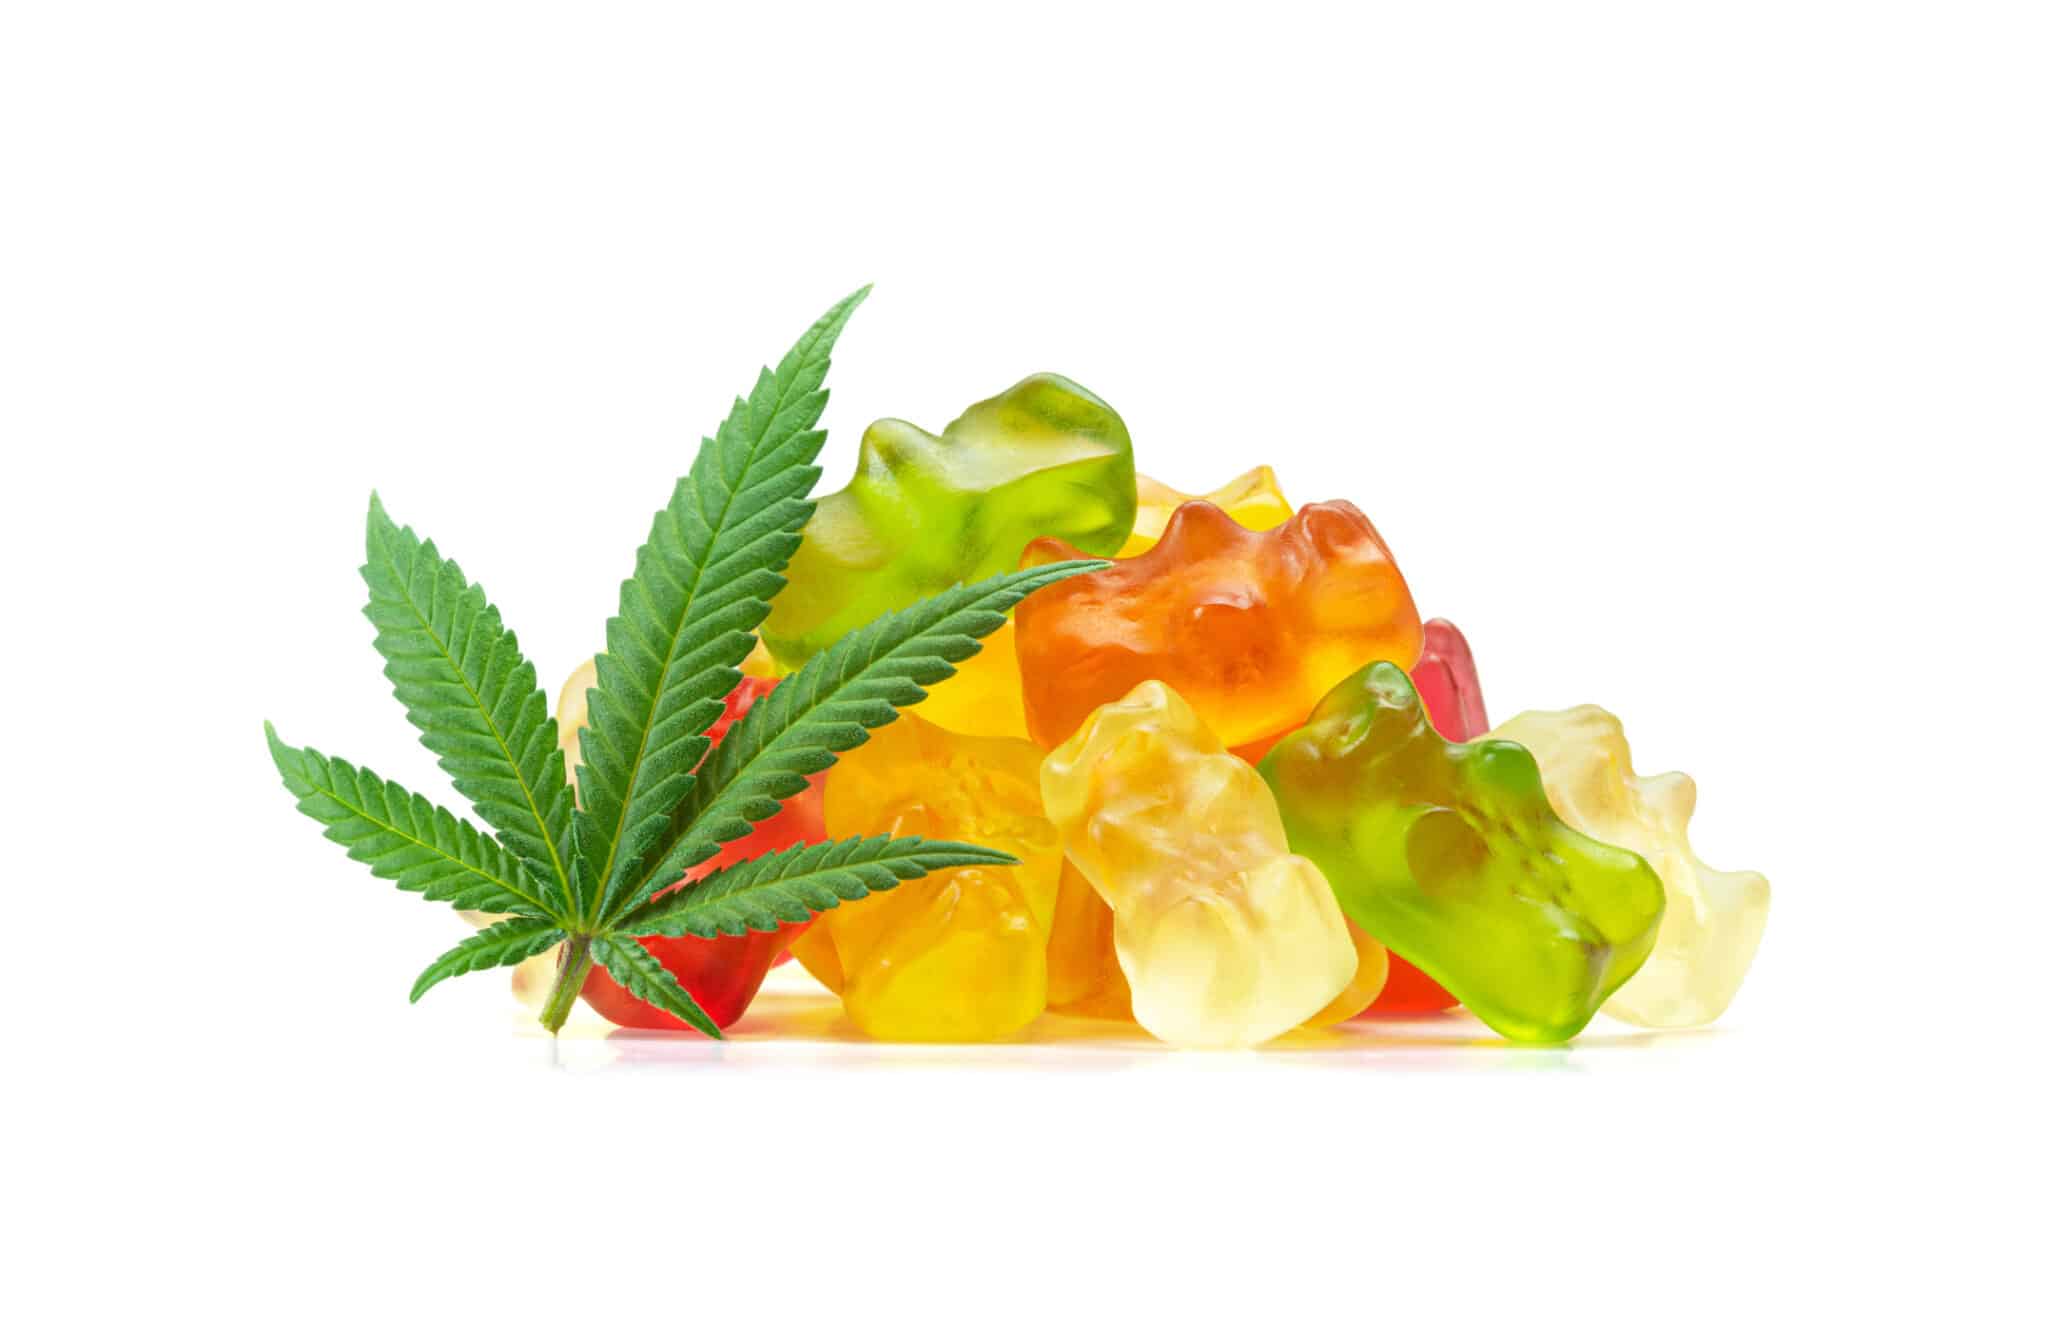 Top 6 Best Cannabis Edibles for Sale in New Jersey